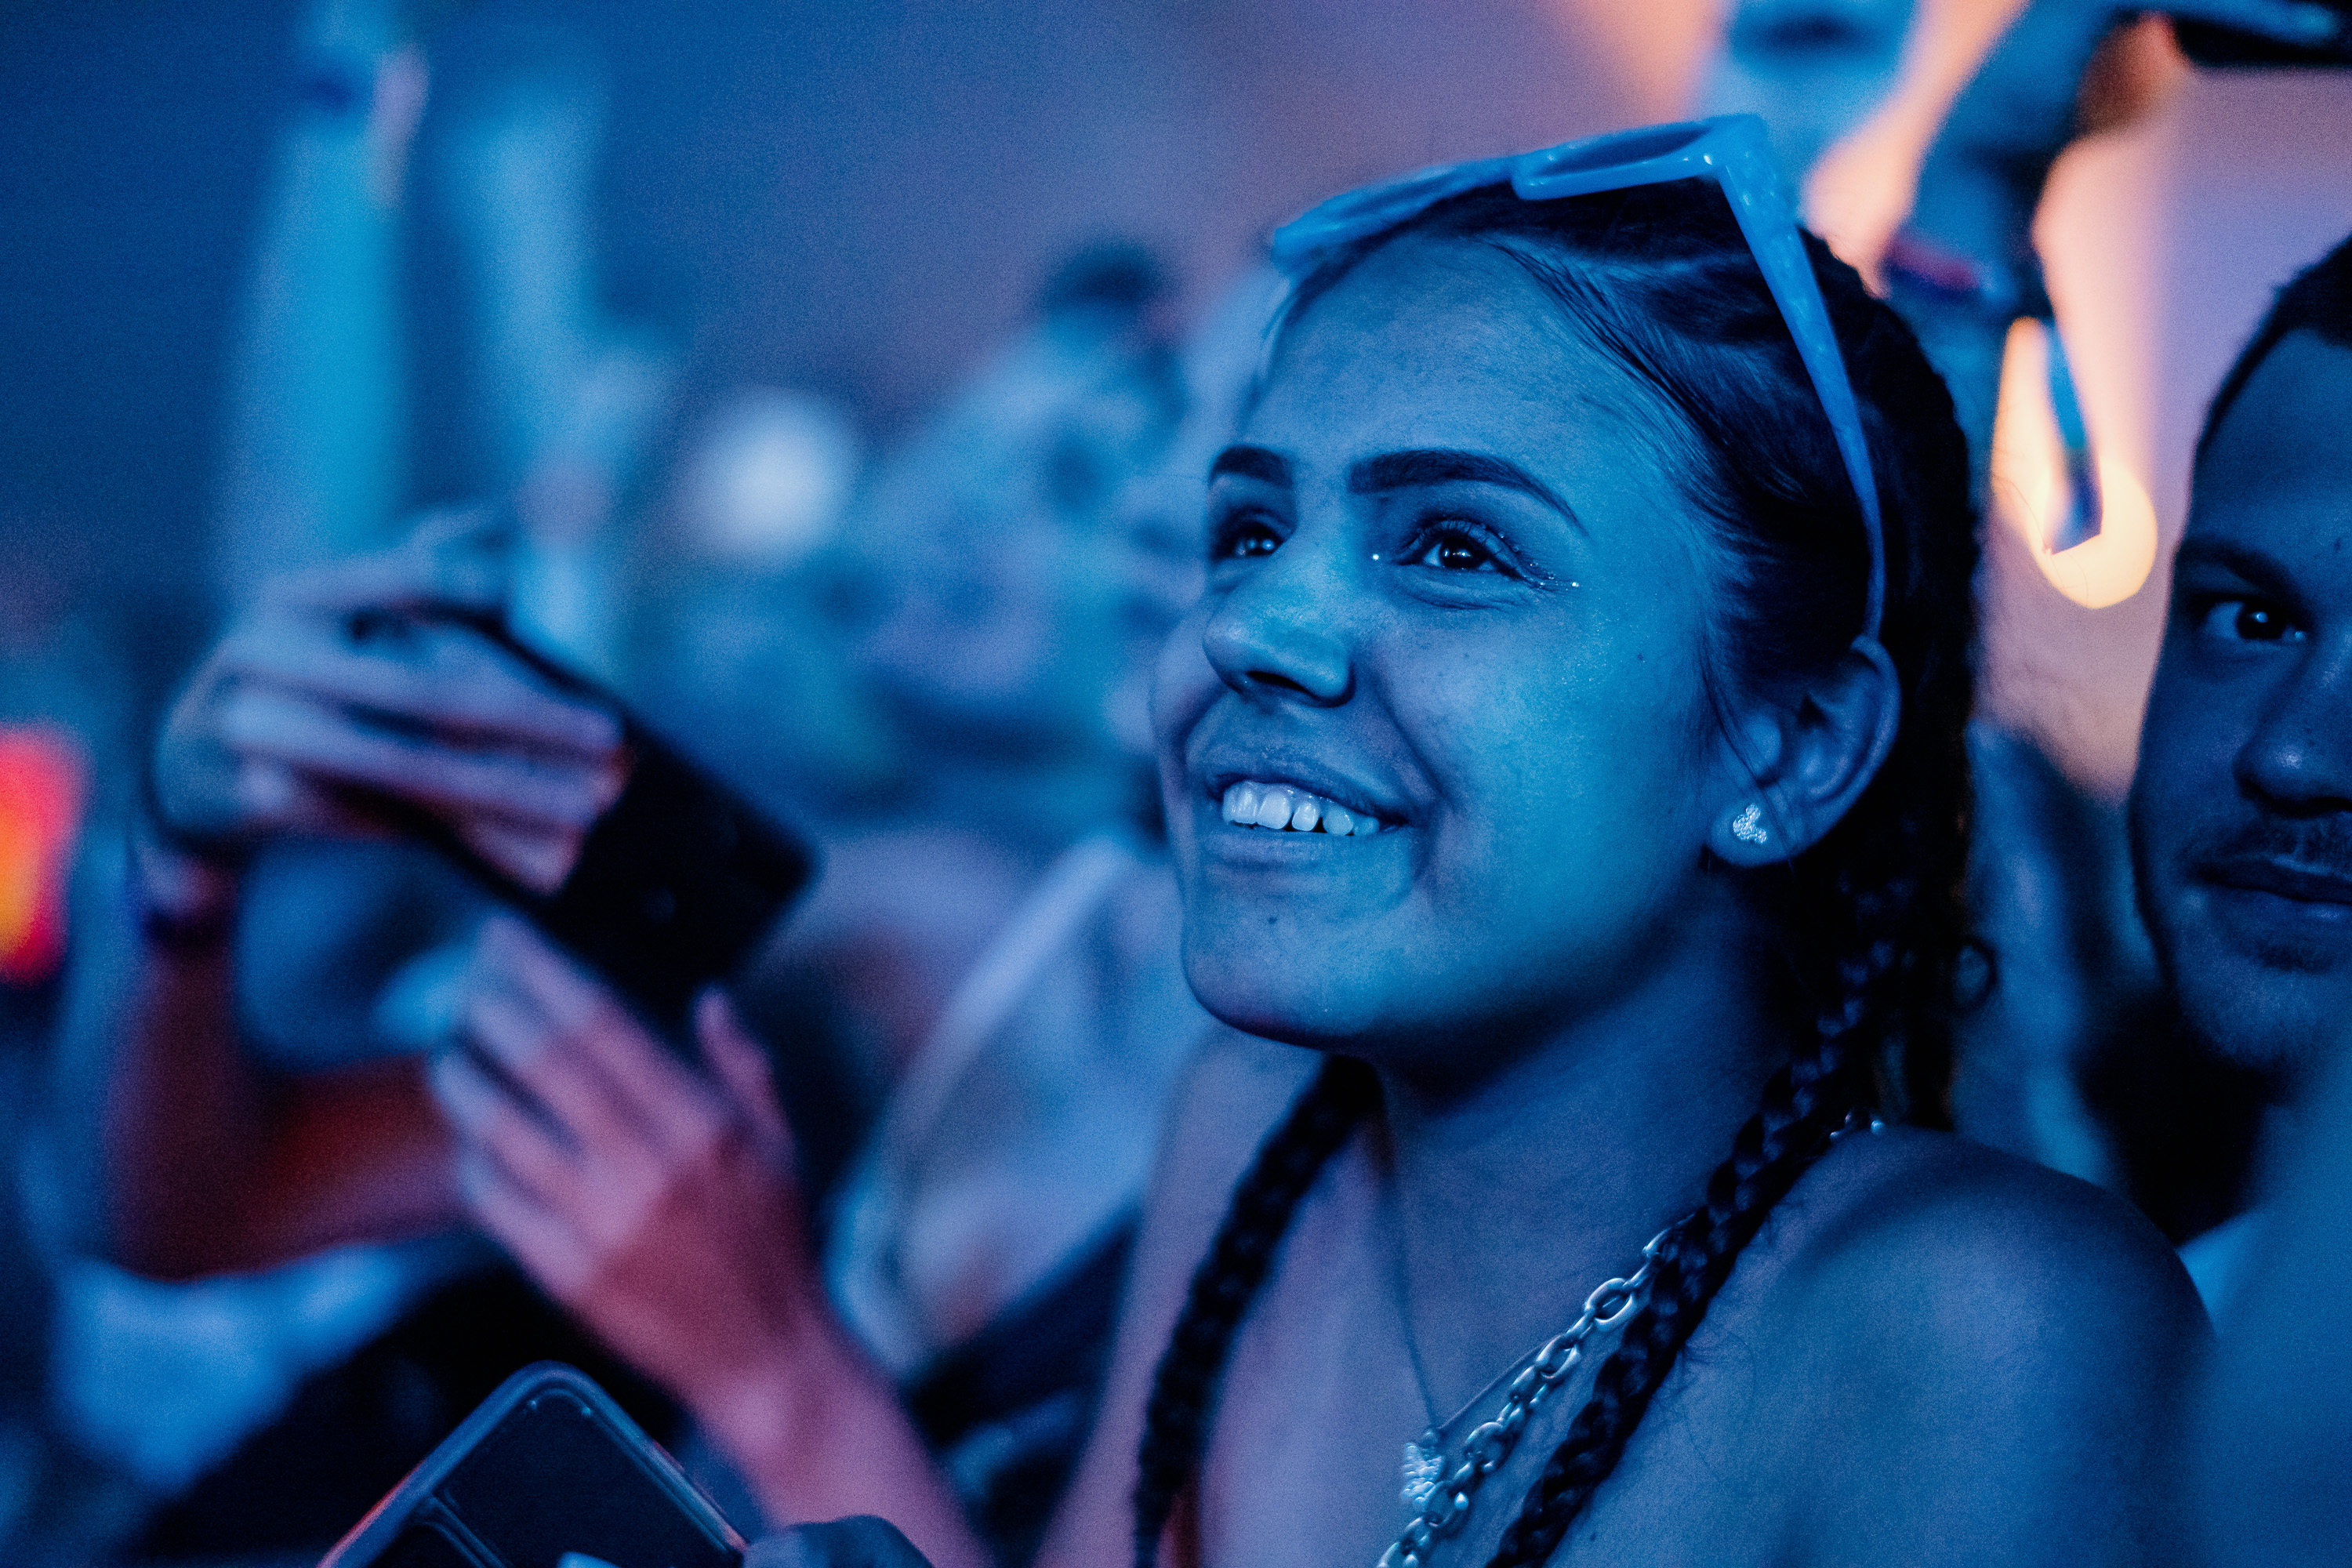 Music fan at Sziget